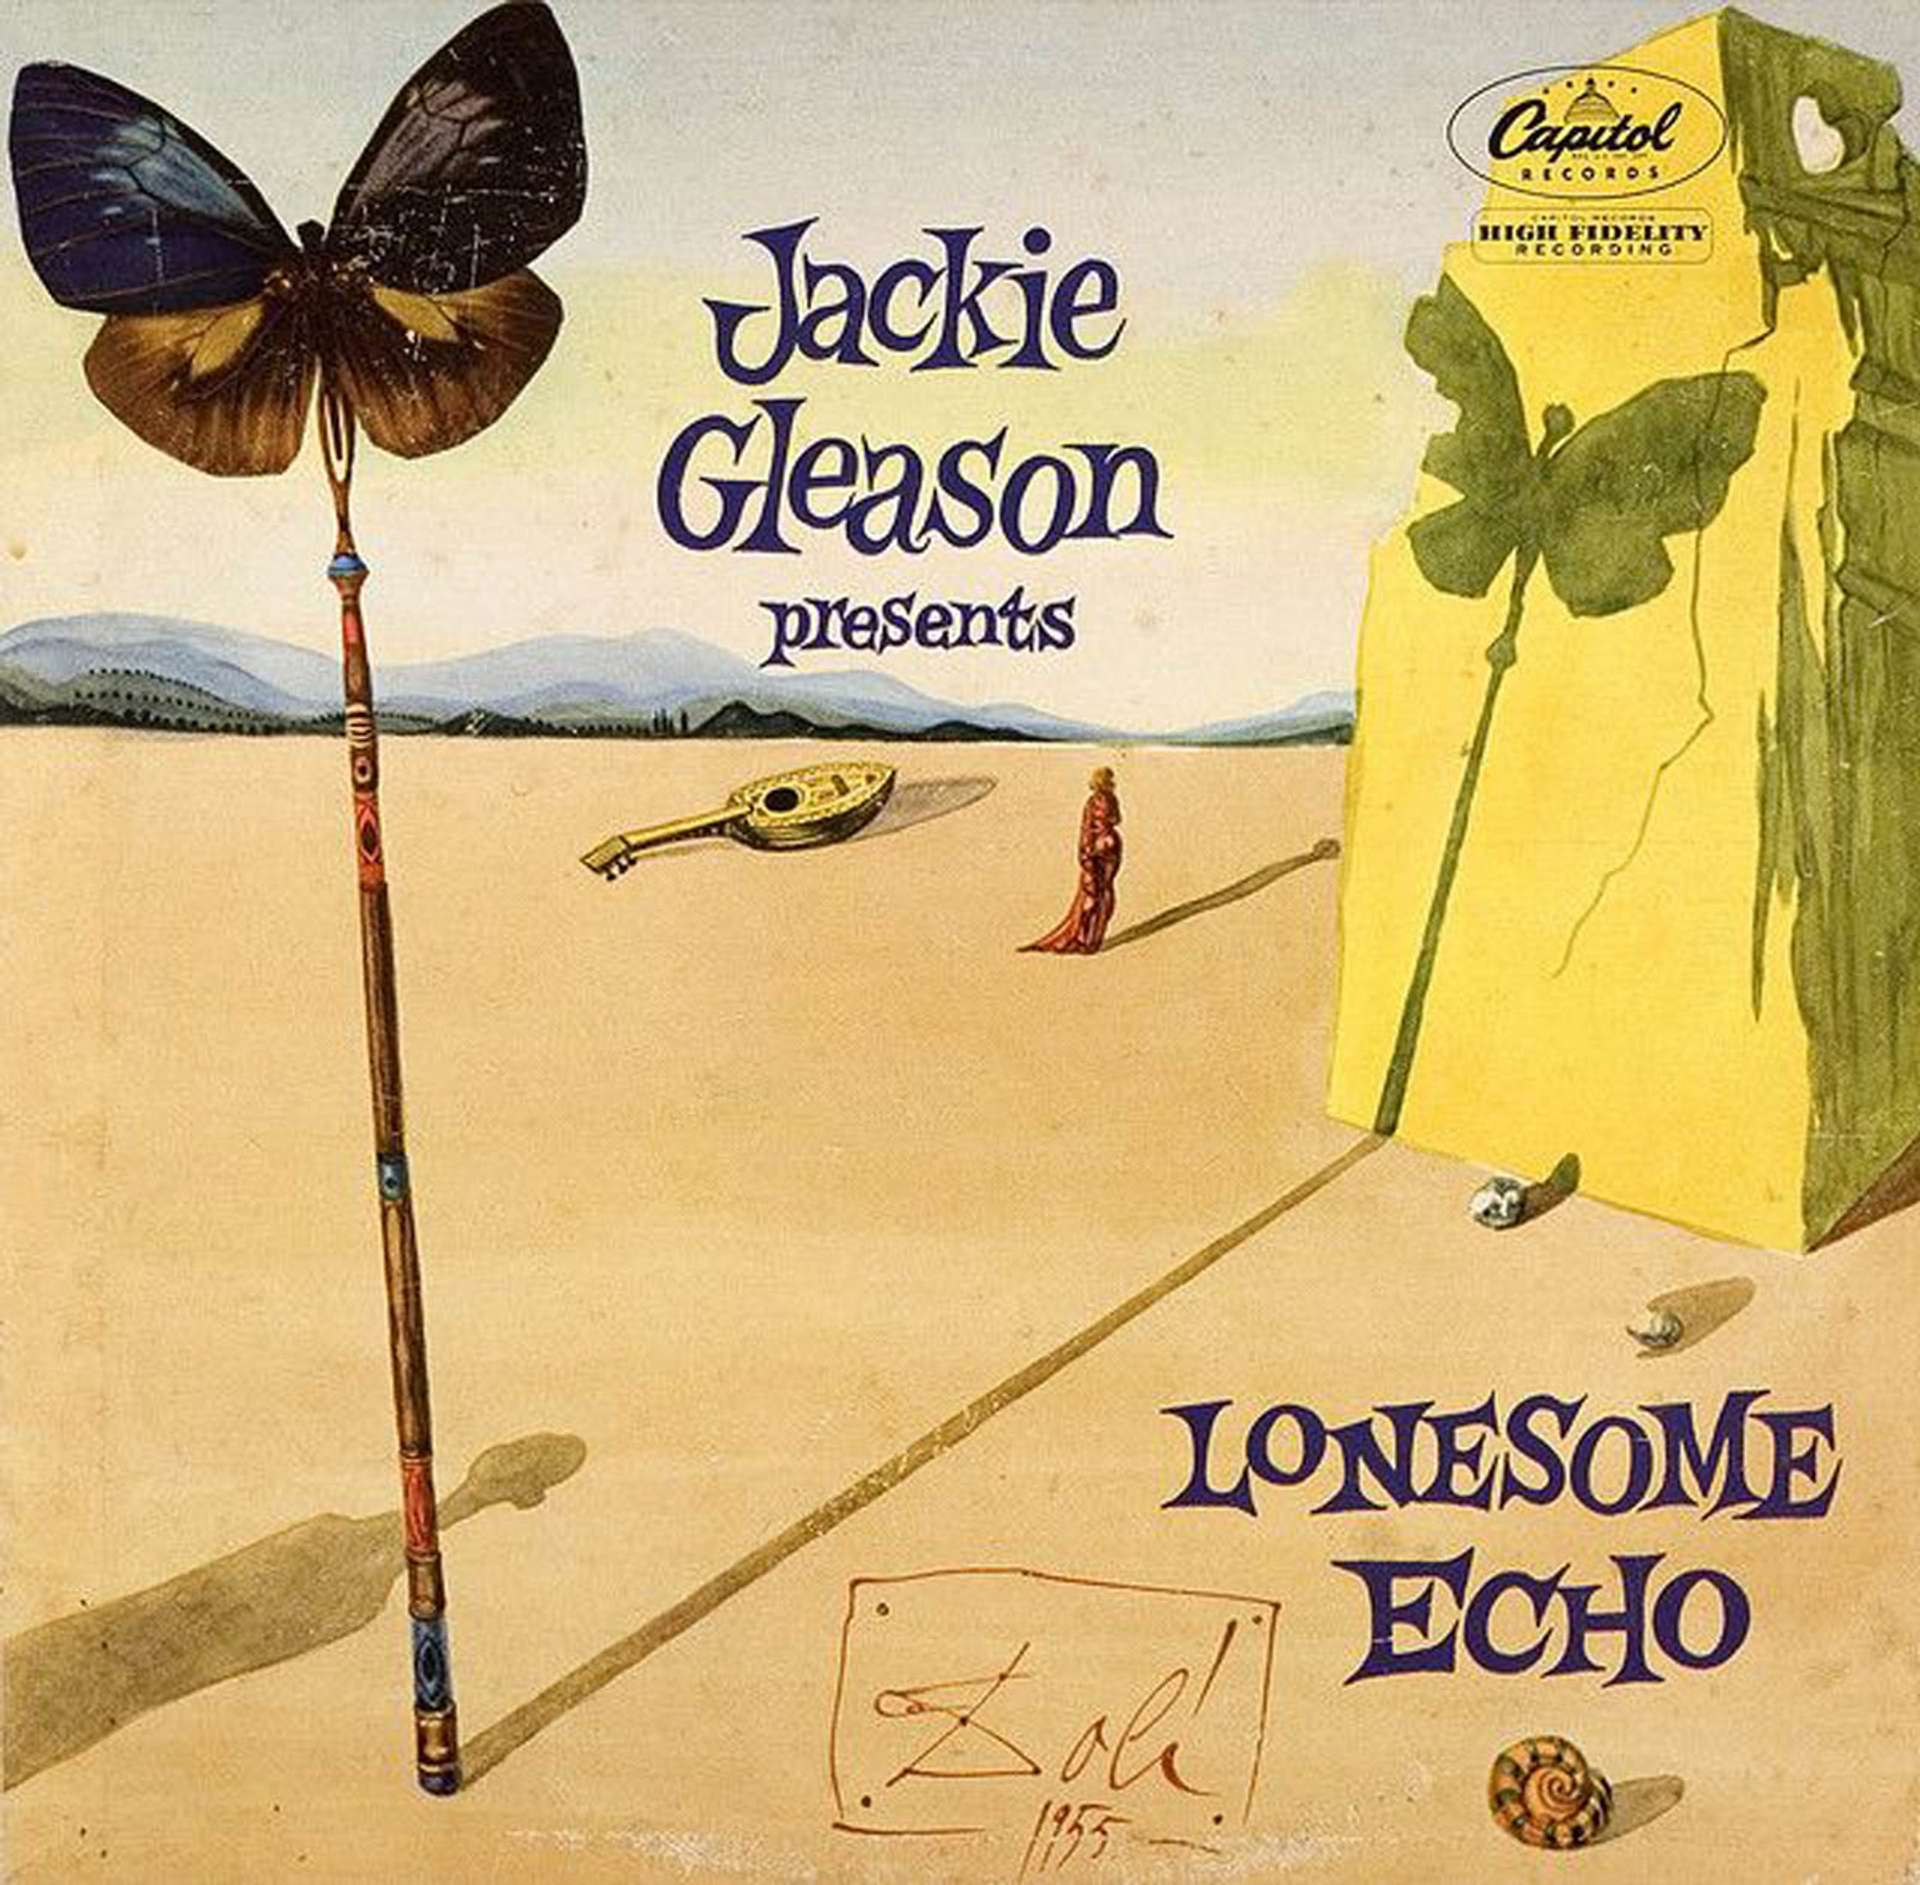 An image of the cover of the album Lonesome Echo by Jackie Gleason. The art is an illustration by Salvador Dalí, depicting a desert with several figures including a woman, a snail, a stringed instrument and a large butterfly on a stick. The illustration is signed.